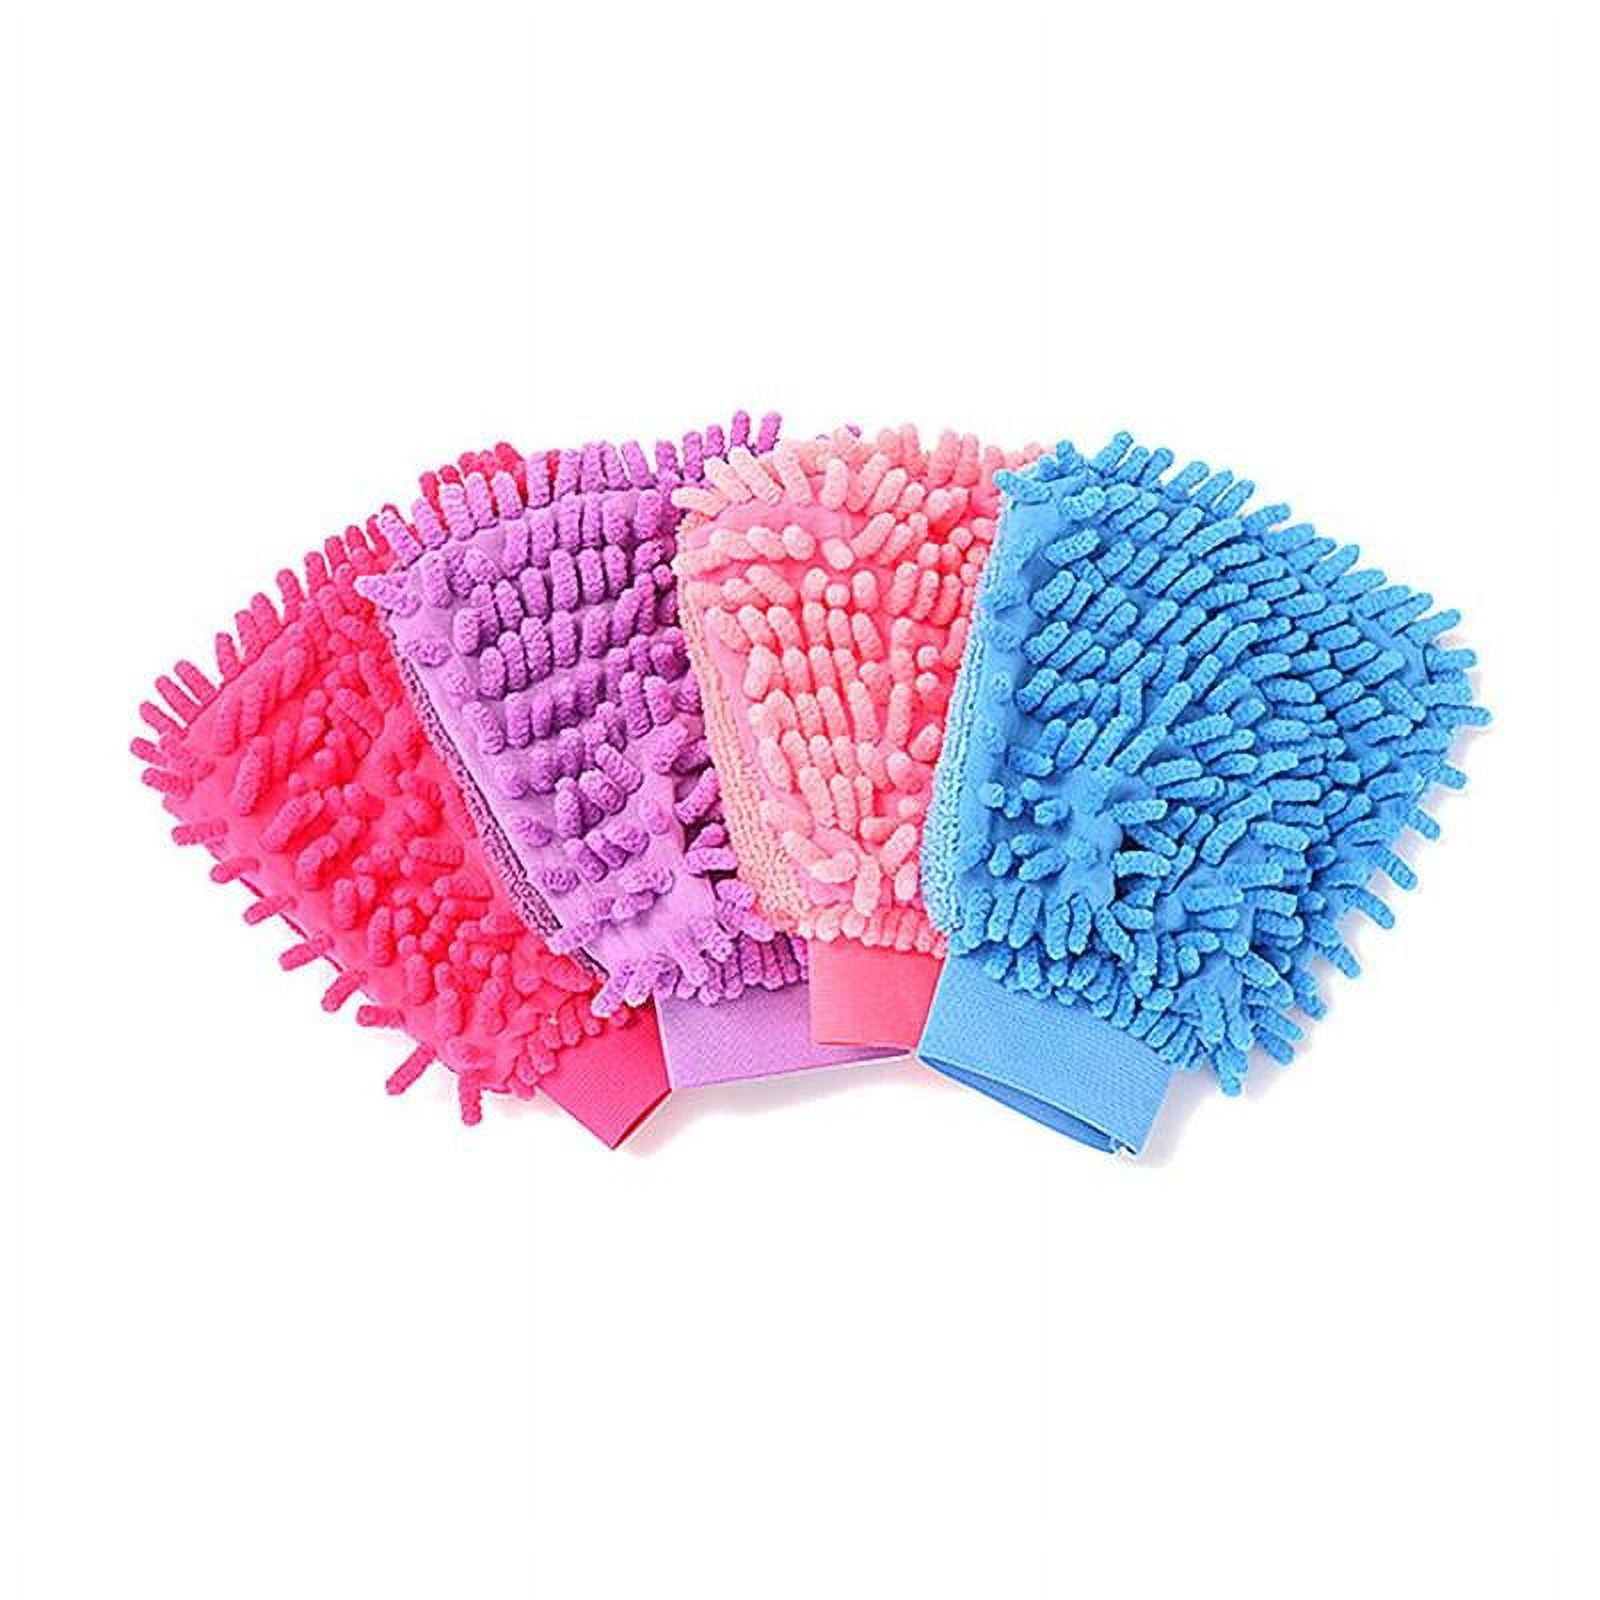 1pc Microfiber Dusting Cleaning Glove Mitt Cars Blinds Windows Dust Wash  Remover